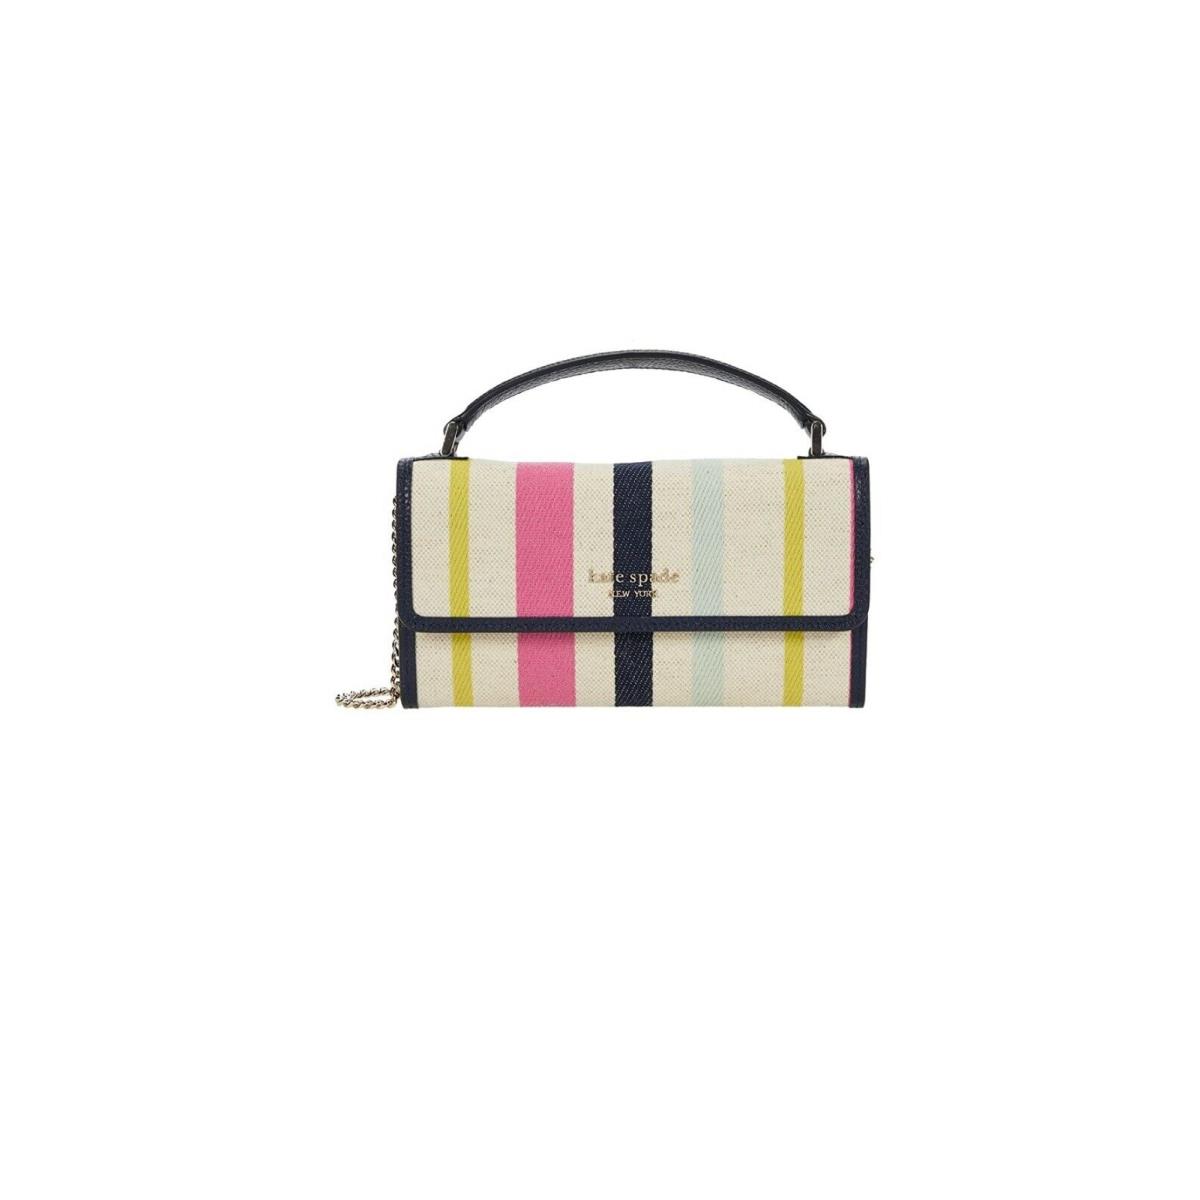 Kate Spade New York Roulette Canvas Stripe Top-handle Crossbody Multi One Size - Exterior: